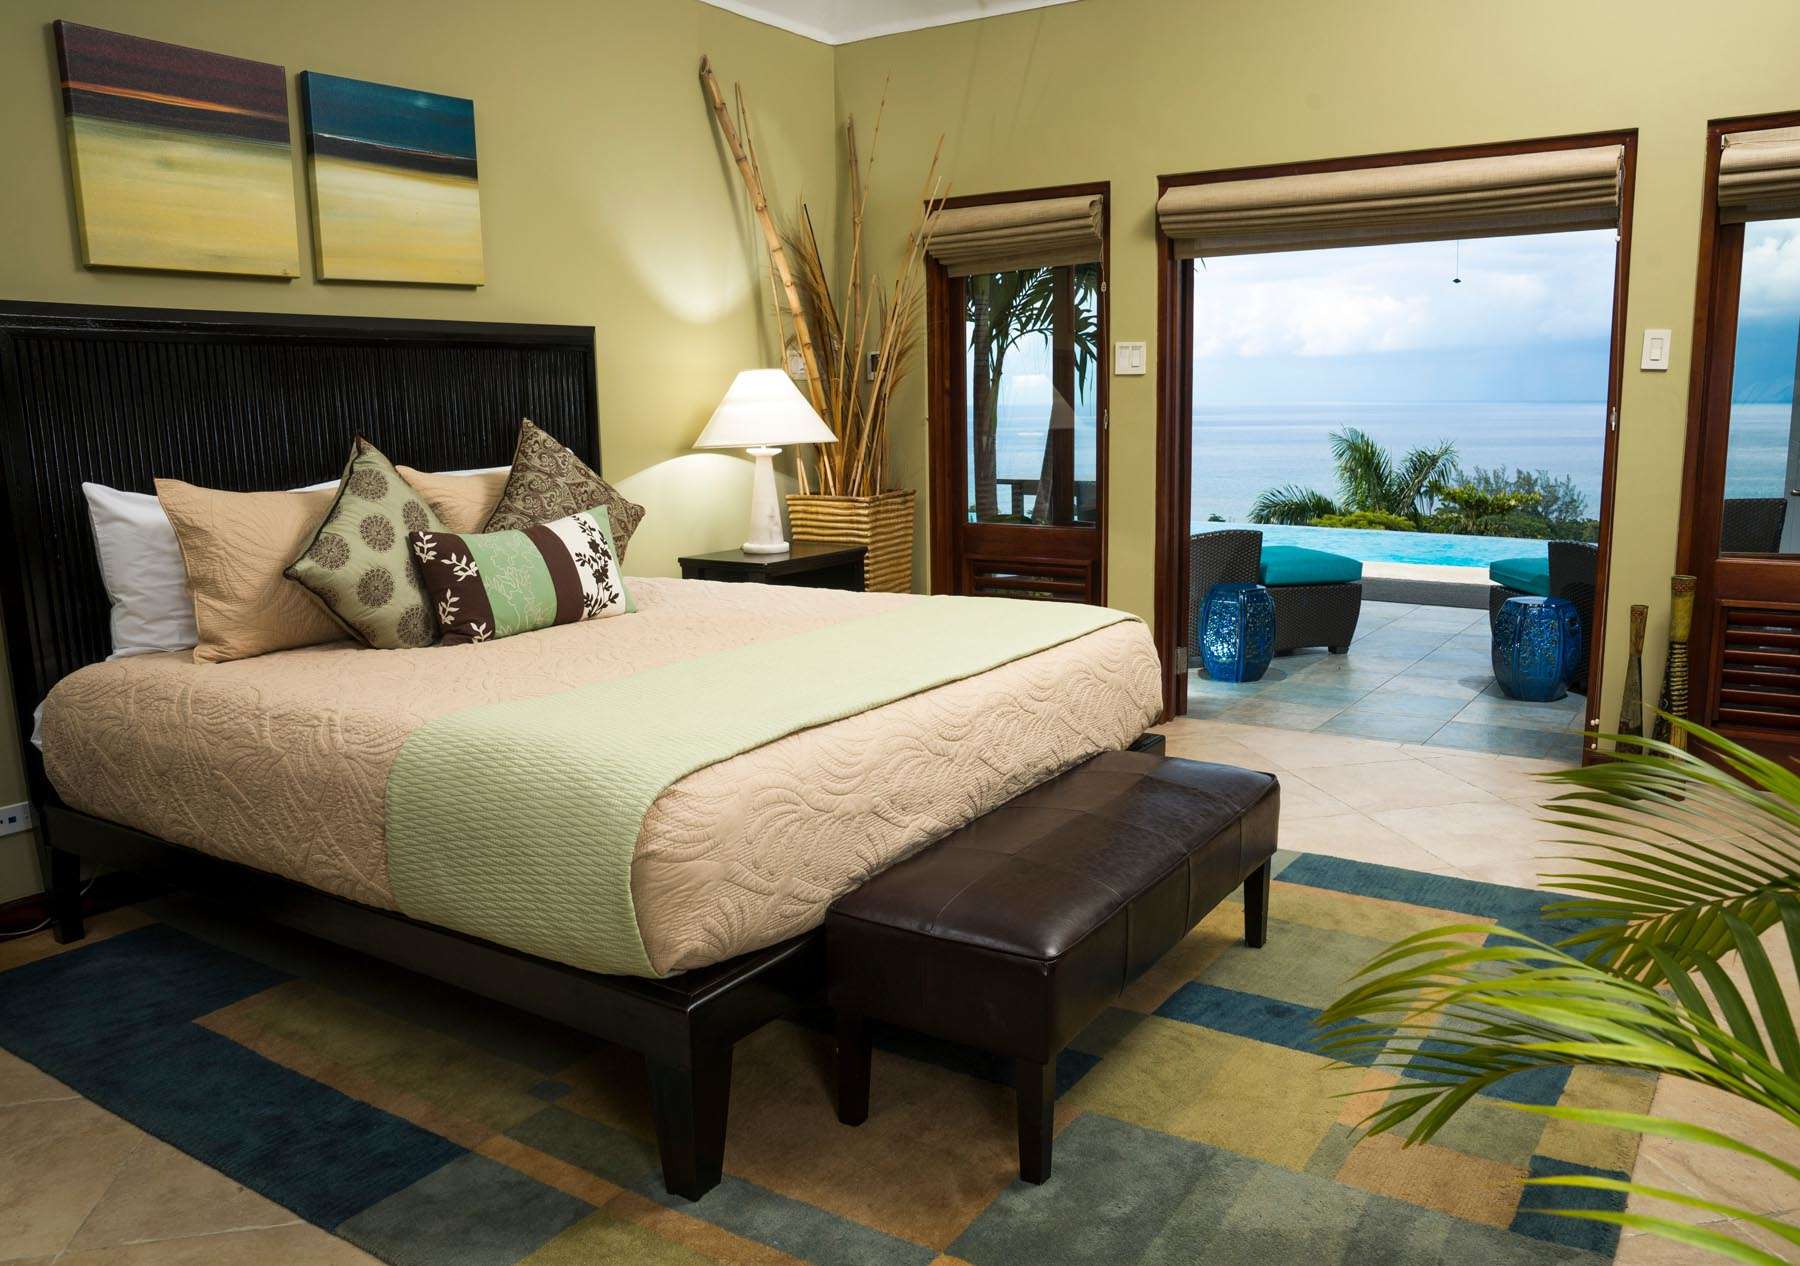 A bedroom with a view of the ocean and a bed.